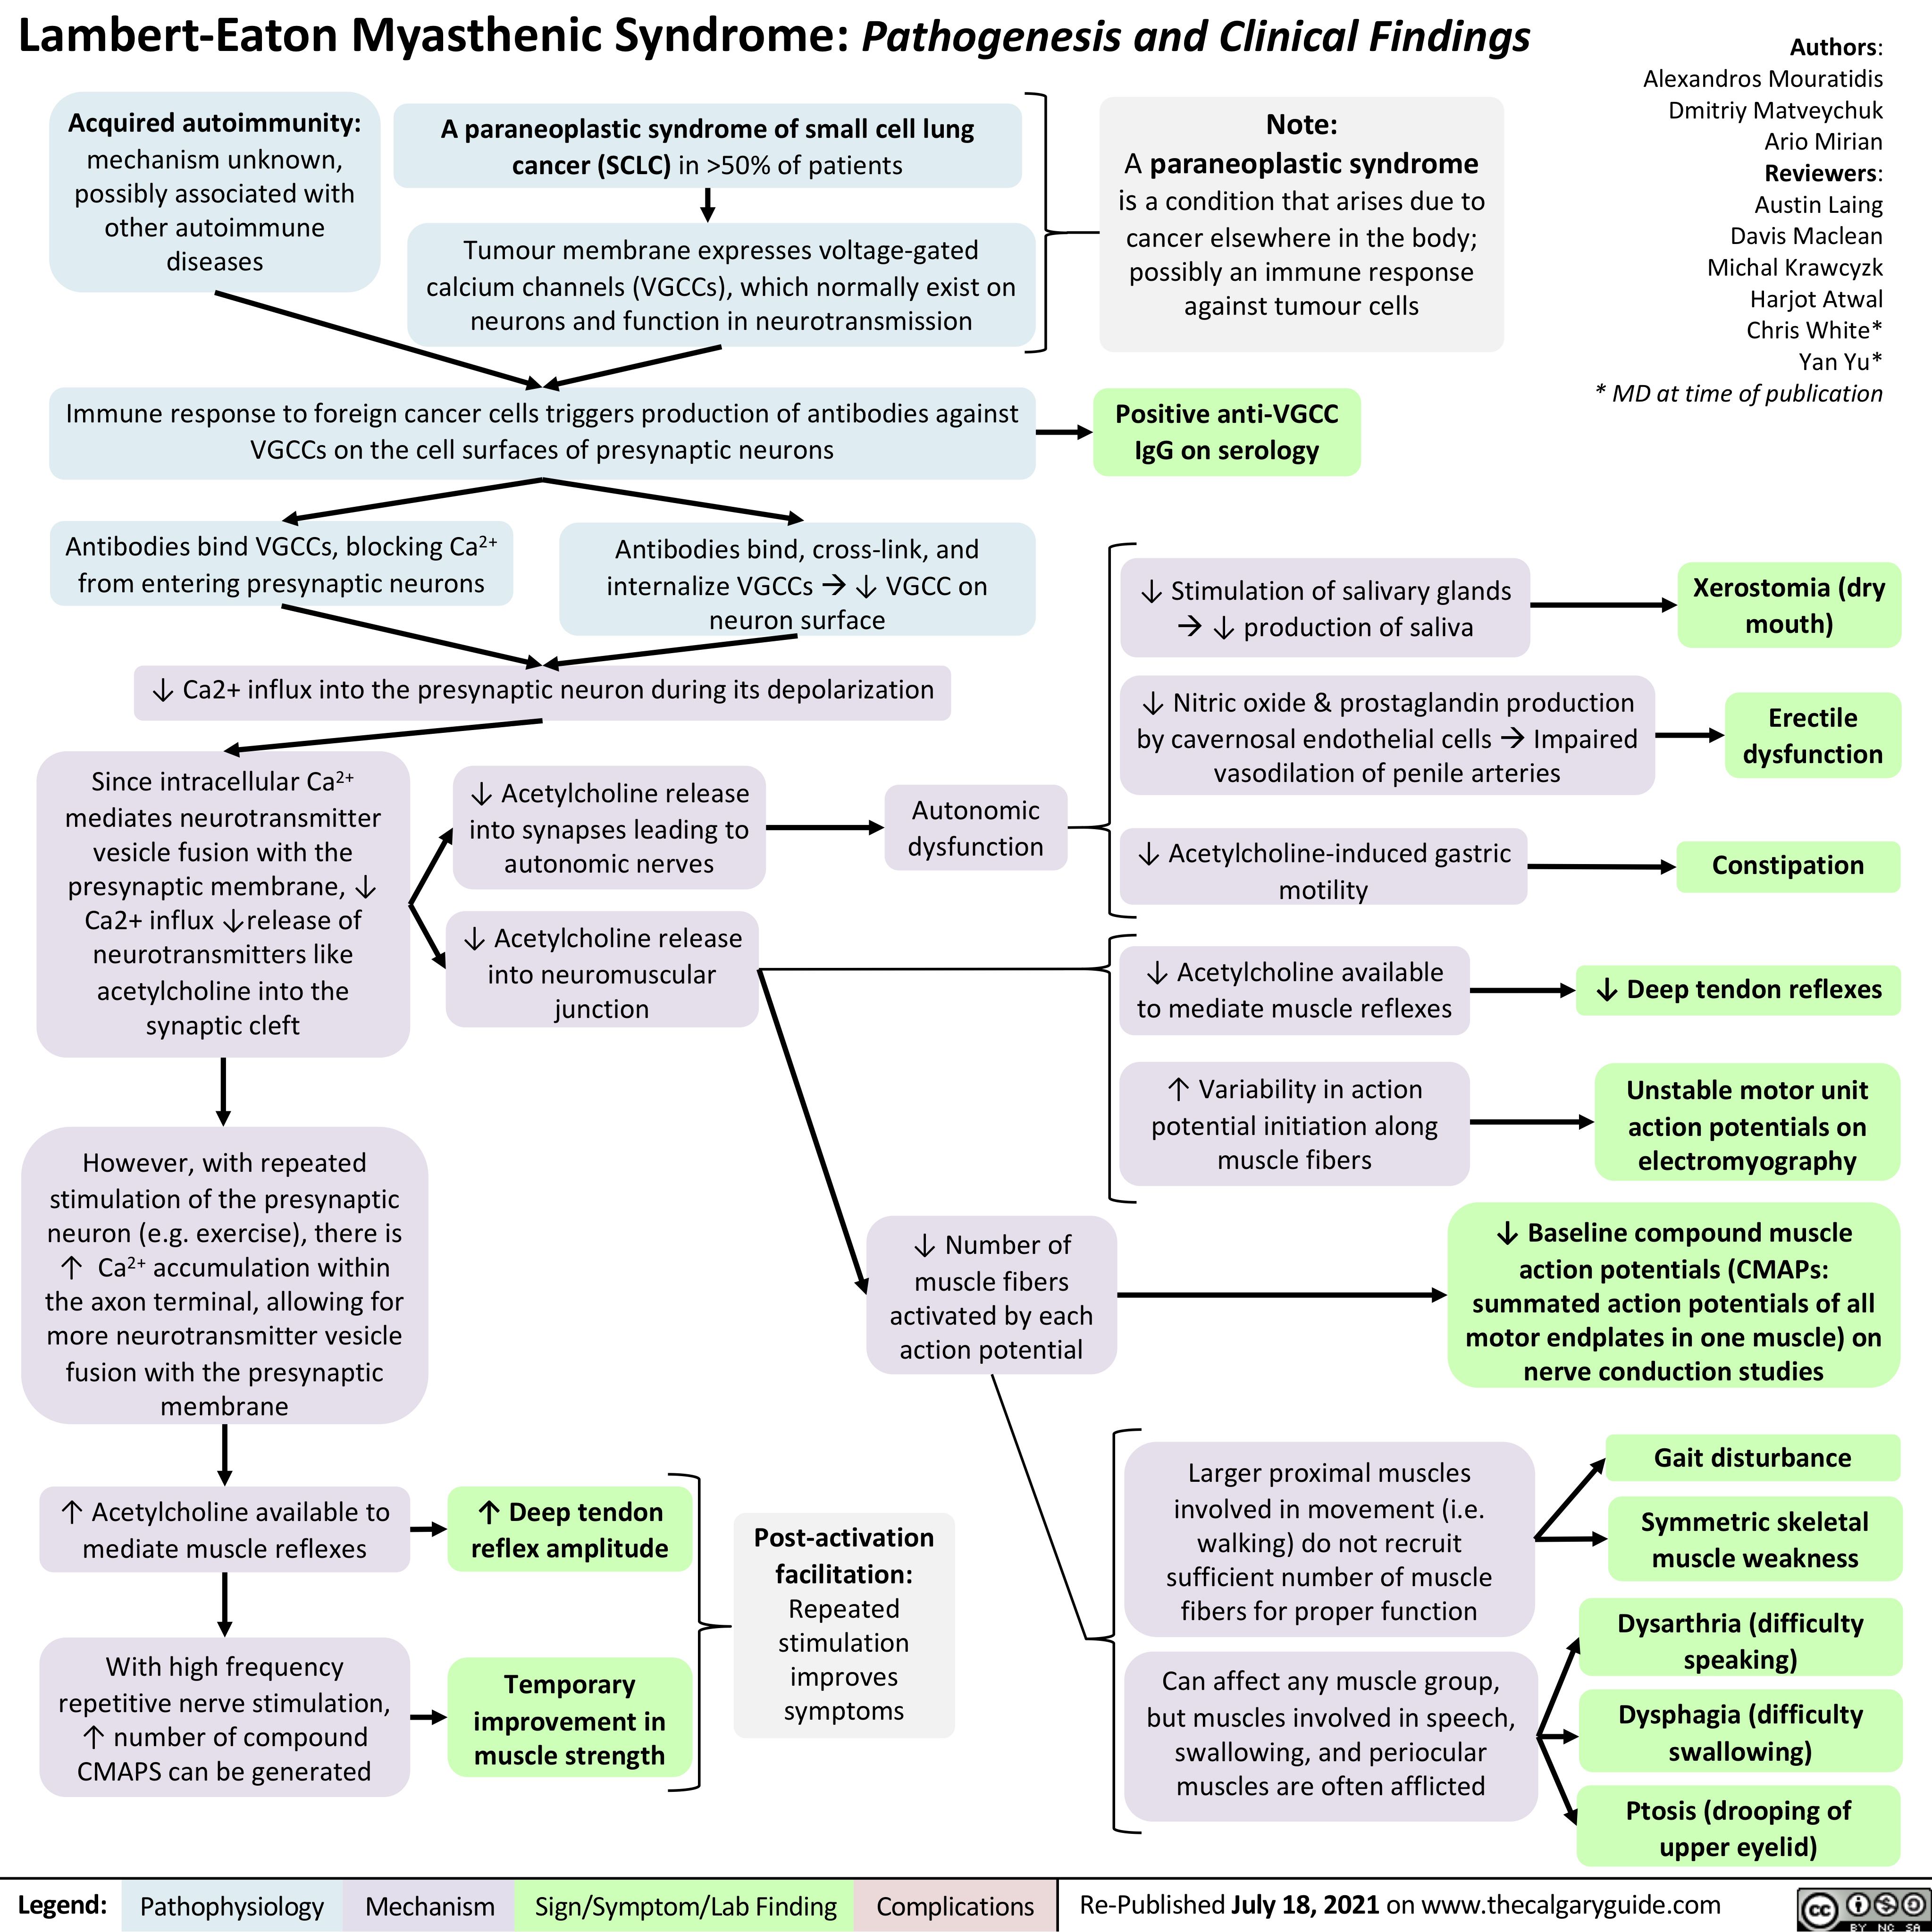 Lambert-Eaton Myasthenic Syndrome: Pathogenesis and Clinical Findings
Authors: Alexandros Mouratidis Dmitriy Matveychuk Ario Mirian Reviewers: Austin Laing Davis Maclean Michal Krawcyzk Harjot Atwal Chris White* Yan Yu* * MD at time of publication
    Acquired autoimmunity:
mechanism unknown, possibly associated with other autoimmune diseases
A paraneoplastic syndrome of small cell lung cancer (SCLC) in >50% of patients
Tumour membrane expresses voltage-gated calcium channels (VGCCs), which normally exist on neurons and function in neurotransmission
Note:
A paraneoplastic syndrome is a condition that arises due to cancer elsewhere in the body; possibly an immune response against tumour cells
Positive anti-VGCC IgG on serology
↓ Stimulation of salivary glands à↓ production of saliva
↓ Nitric oxide & prostaglandin production by cavernosal endothelial cellsàImpaired vasodilation of penile arteries
↓ Acetylcholine-induced gastric motility
↓ Acetylcholine available to mediate muscle reflexes
↑ Variability in action potential initiation along muscle fibers
       Immune response to foreign cancer cells triggers production of antibodies against VGCCs on the cell surfaces of presynaptic neurons
Antibodies bind VGCCs, blocking Ca2+ Antibodies bind, cross-link, and
       from entering presynaptic neurons
↓ Ca2+ influx into the presynaptic neuron during its depolarization
internalize VGCCsà↓ VGCC on neuron surface
Xerostomia (dry mouth)
Erectile dysfunction
Constipation
↓ Deep tendon reflexes
Unstable motor unit action potentials on electromyography
↓ Baseline compound muscle action potentials (CMAPs:
summated action potentials of all motor endplates in one muscle) on nerve conduction studies
         Since intracellular Ca2+ mediates neurotransmitter vesicle fusion with the presynaptic membrane, ↓ Ca2+ influx ↓release of neurotransmitters like acetylcholine into the synaptic cleft
However, with repeated stimulation of the presynaptic neuron (e.g. exercise), there is ↑ Ca2+ accumulation within the axon terminal, allowing for more neurotransmitter vesicle fusion with the presynaptic membrane
↑ Acetylcholine available to mediate muscle reflexes
With high frequency repetitive nerve stimulation, ↑ number of compound CMAPS can be generated
↓ Acetylcholine release into synapses leading to autonomic nerves
↓ Acetylcholine release into neuromuscular junction
Autonomic dysfunction
                                ↑ Deep tendon reflex amplitude
Temporary improvement in muscle strength
↓ Number of
muscle fibers activated by each action potential
Post-activation facilitation: Repeated stimulation improves symptoms
Larger proximal muscles involved in movement (i.e. walking) do not recruit sufficient number of muscle fibers for proper function
Can affect any muscle group, but muscles involved in speech, swallowing, and periocular muscles are often afflicted
Gait disturbance
Symmetric skeletal muscle weakness
Dysarthria (difficulty speaking)
Dysphagia (difficulty swallowing)
Ptosis (drooping of upper eyelid)
             Legend:
 Pathophysiology
 Mechanism
Sign/Symptom/Lab Finding
  Complications
Re-Published July 18, 2021 on www.thecalgaryguide.com
   